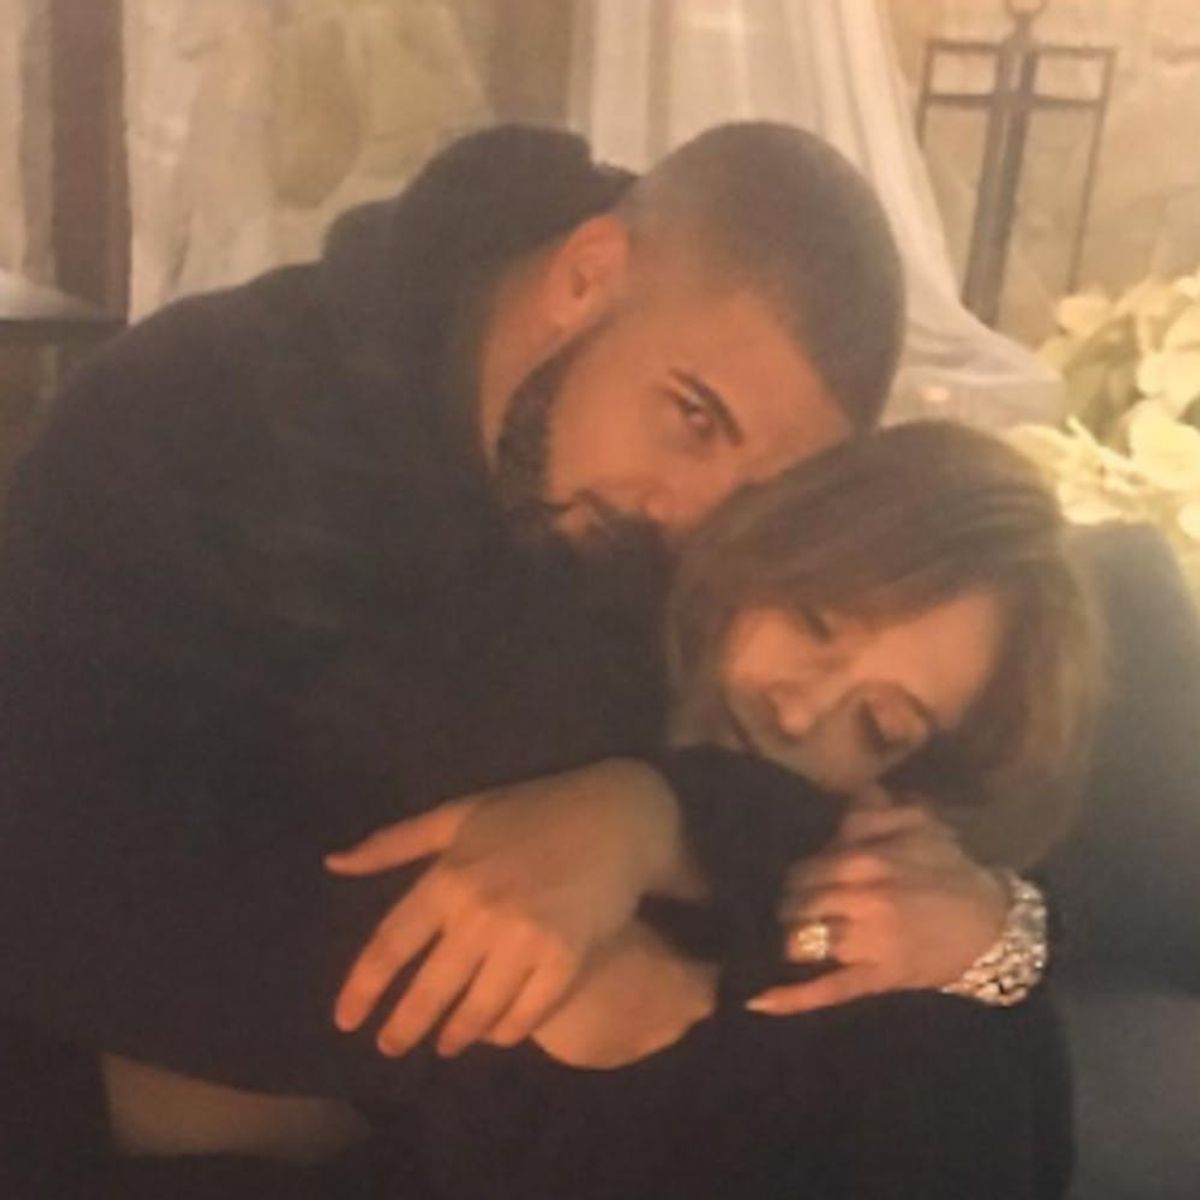 Morning Buzz! This Pic of Drake and Jennifer Lopez Getting Cozy Has People Freaking Out + More